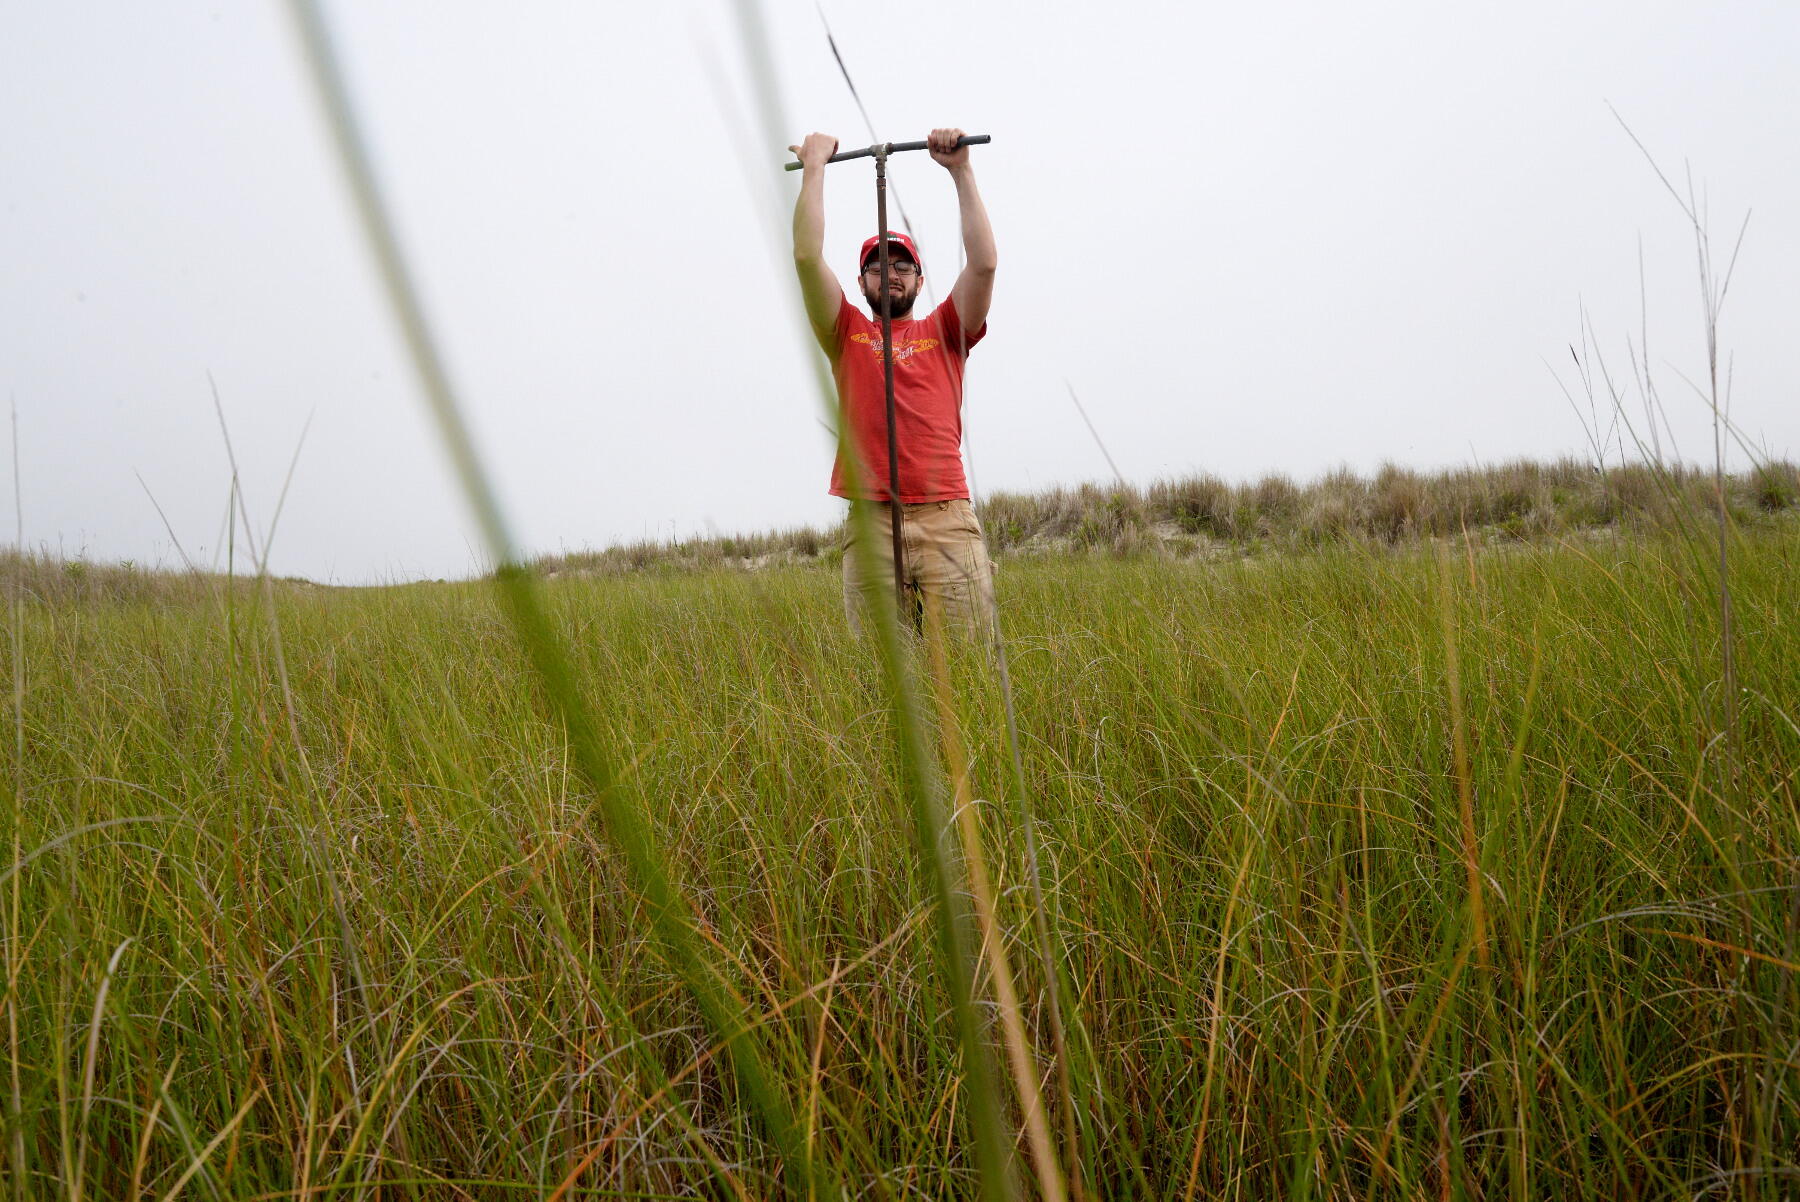 Biology master's degree student Michael Sinclair uses a soil auger on Hog Island to take water samples. (Photo by Brian McNeill, University Relations)